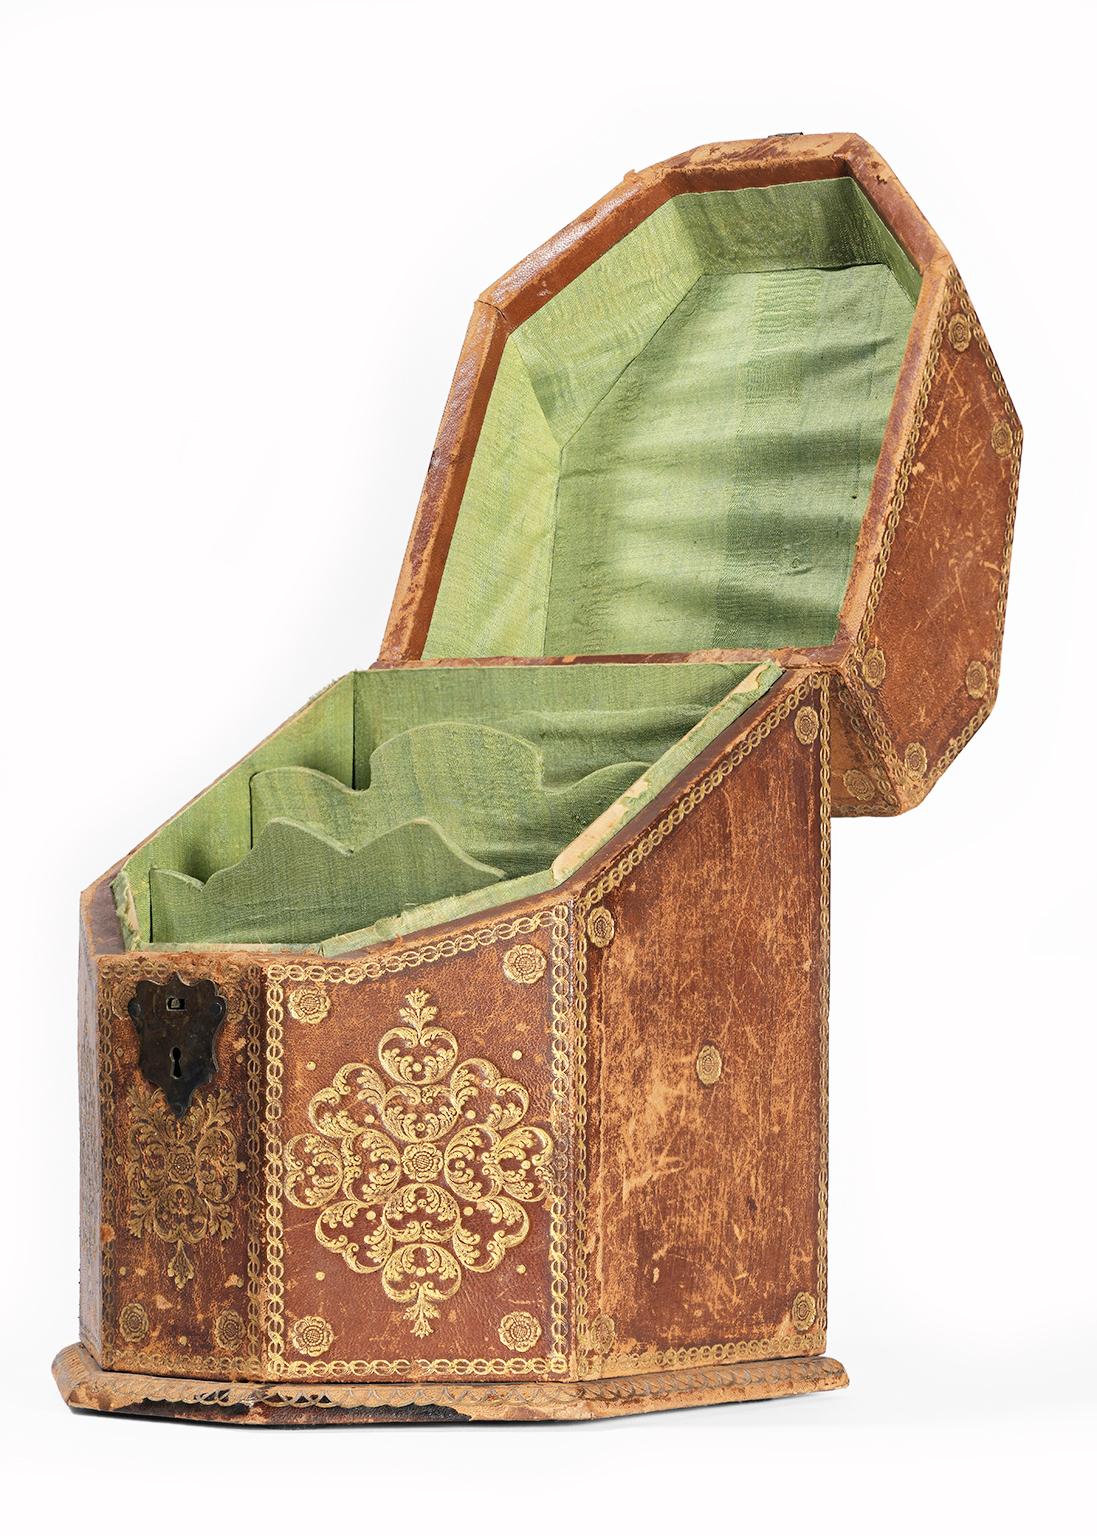 Antique cutlery box
Northern Italy, second half of the 19th century
It measures 11.61 in x 8.07 in x 9.05 in (29.5 x 20.5 x 23 cm)
lb 2.86 (kg 1.3)
The state of conservation: Good. Some consumption of the leather in the lower part of the box. The